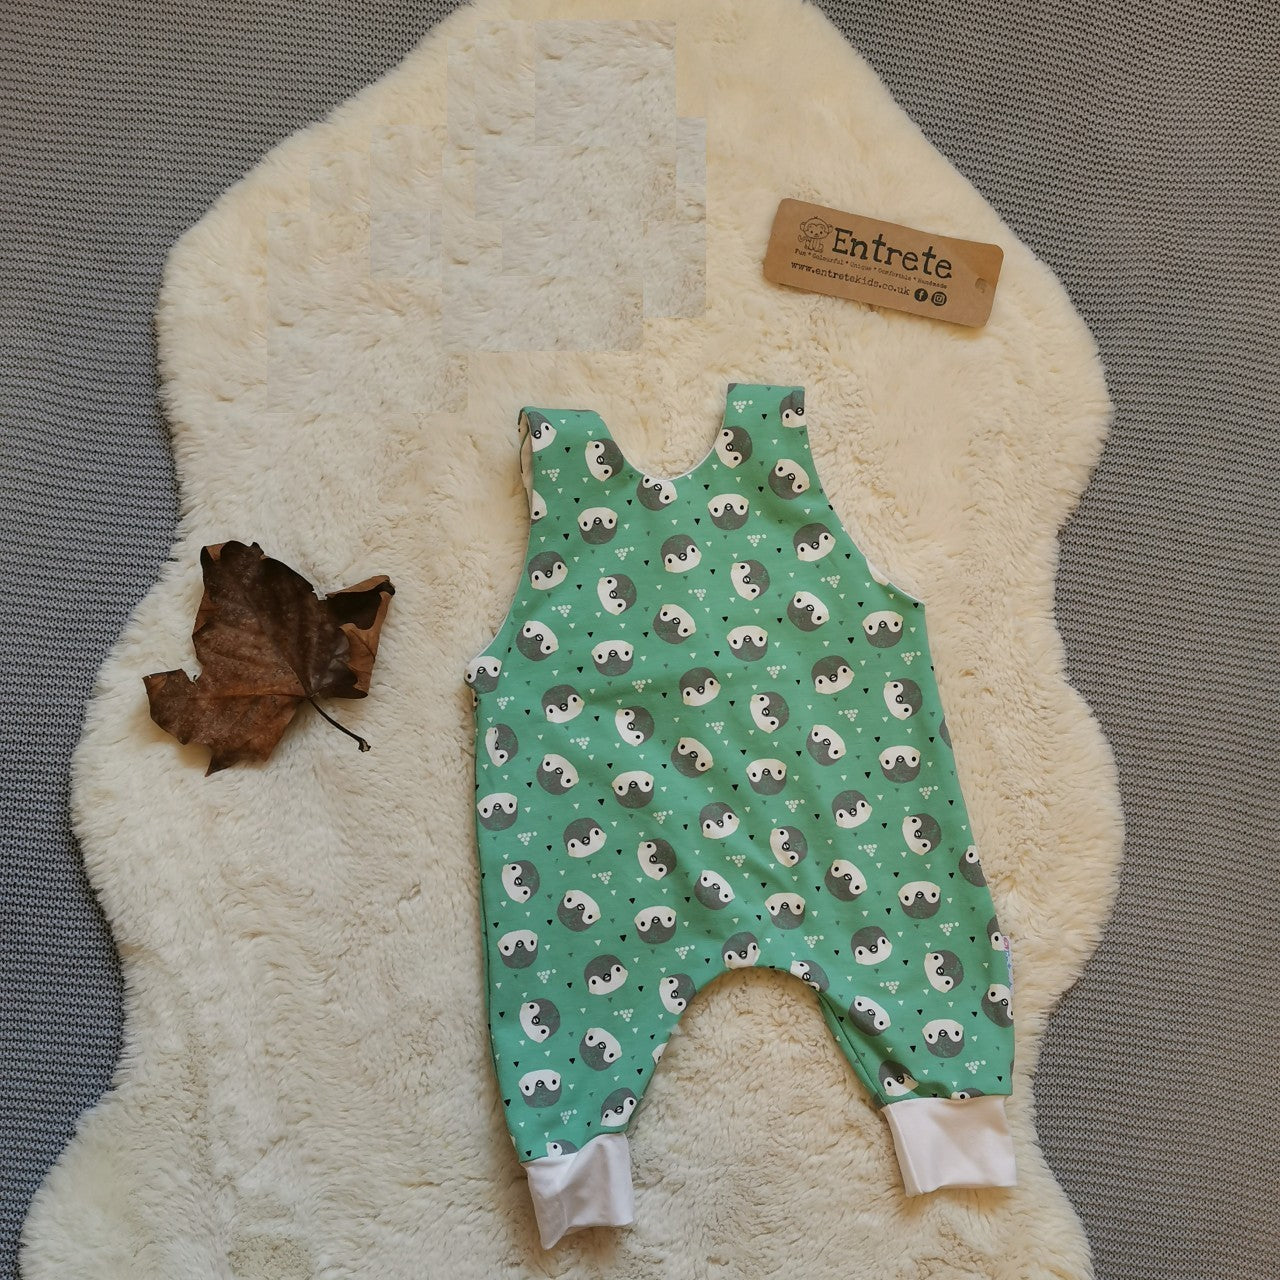 Rear view of the gorgeously ethical organic mint penguins sleeveless romper. Handmade using mint penguins and white organic cotton jerseys' with a natural bamboo lining.